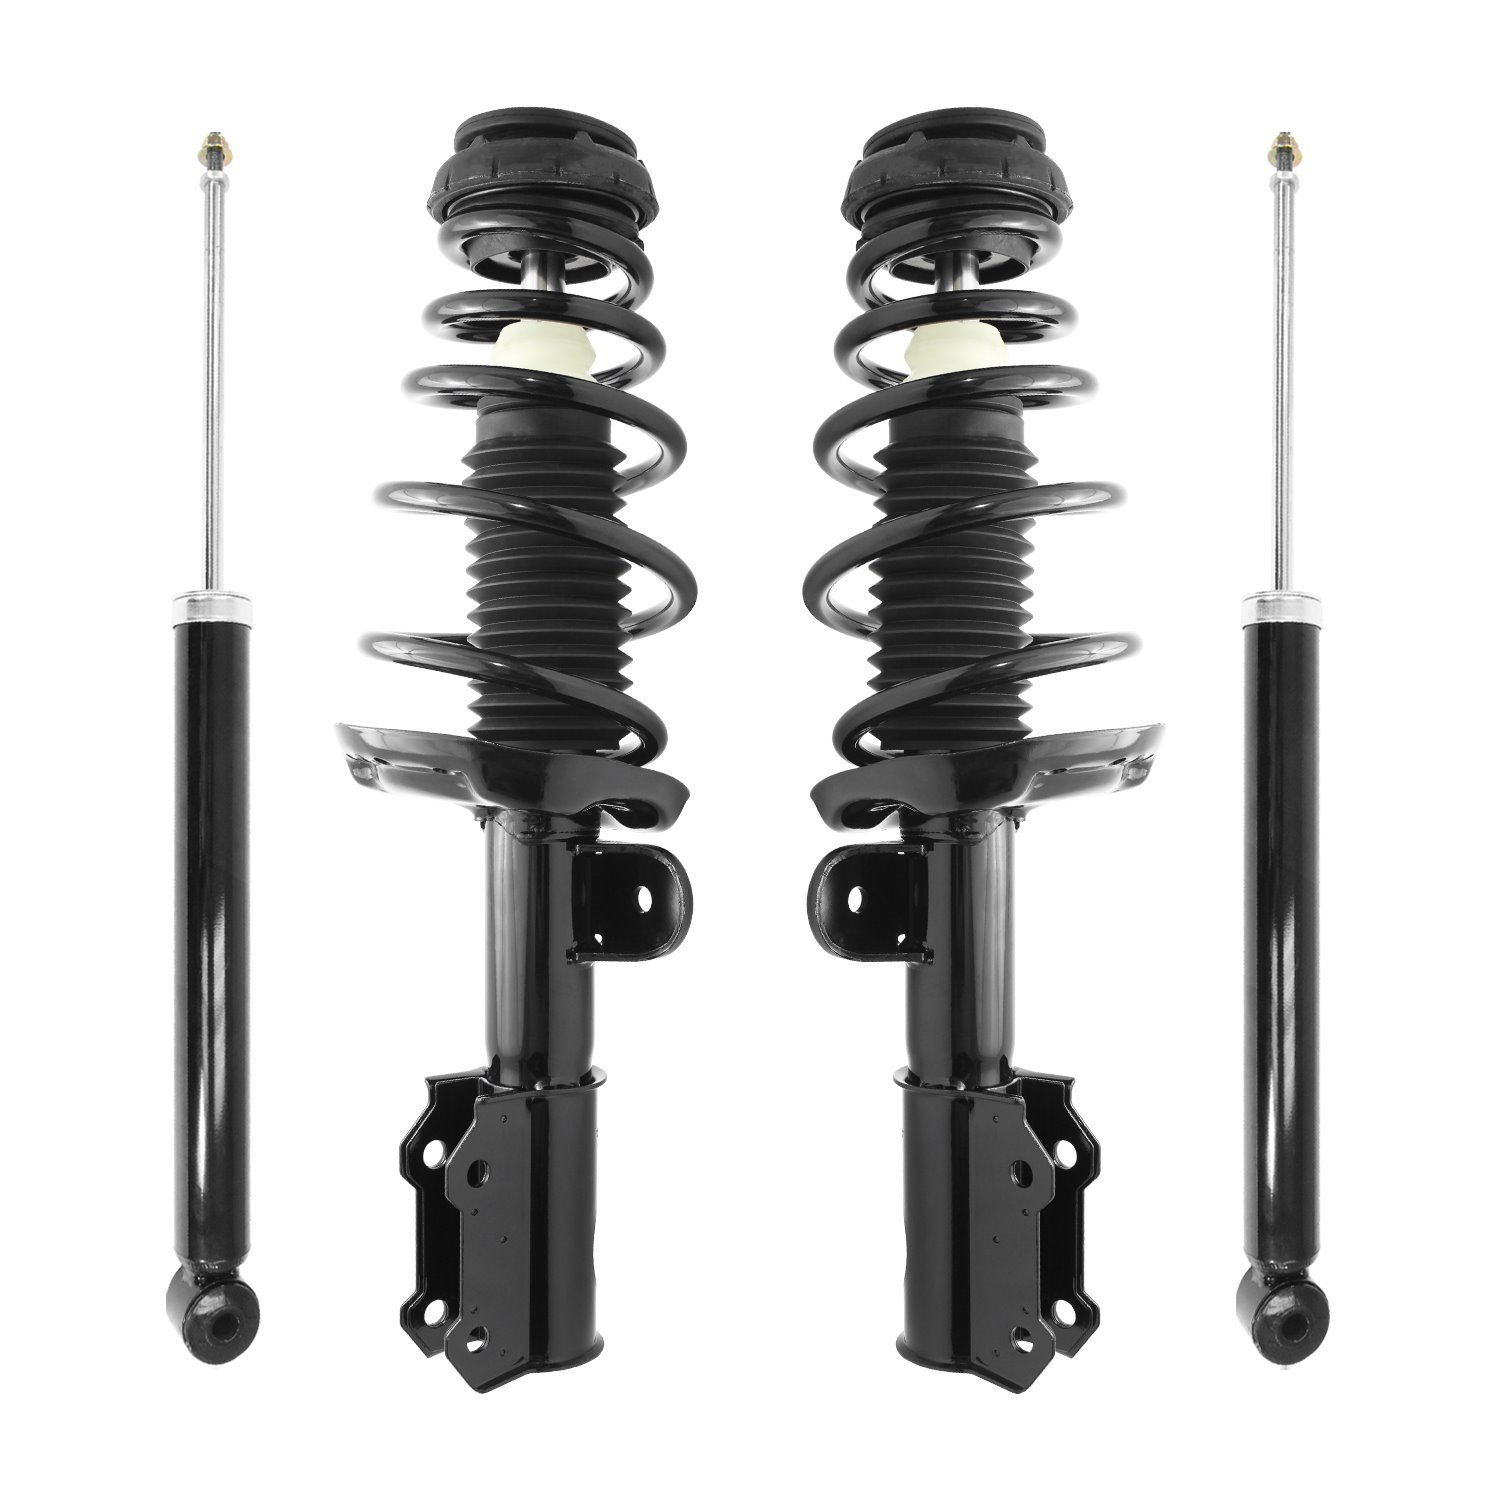 4-11885-251180-001 Front & Rear Suspension Strut & Coil Spring Assembly Fits Select Chevy Cruze